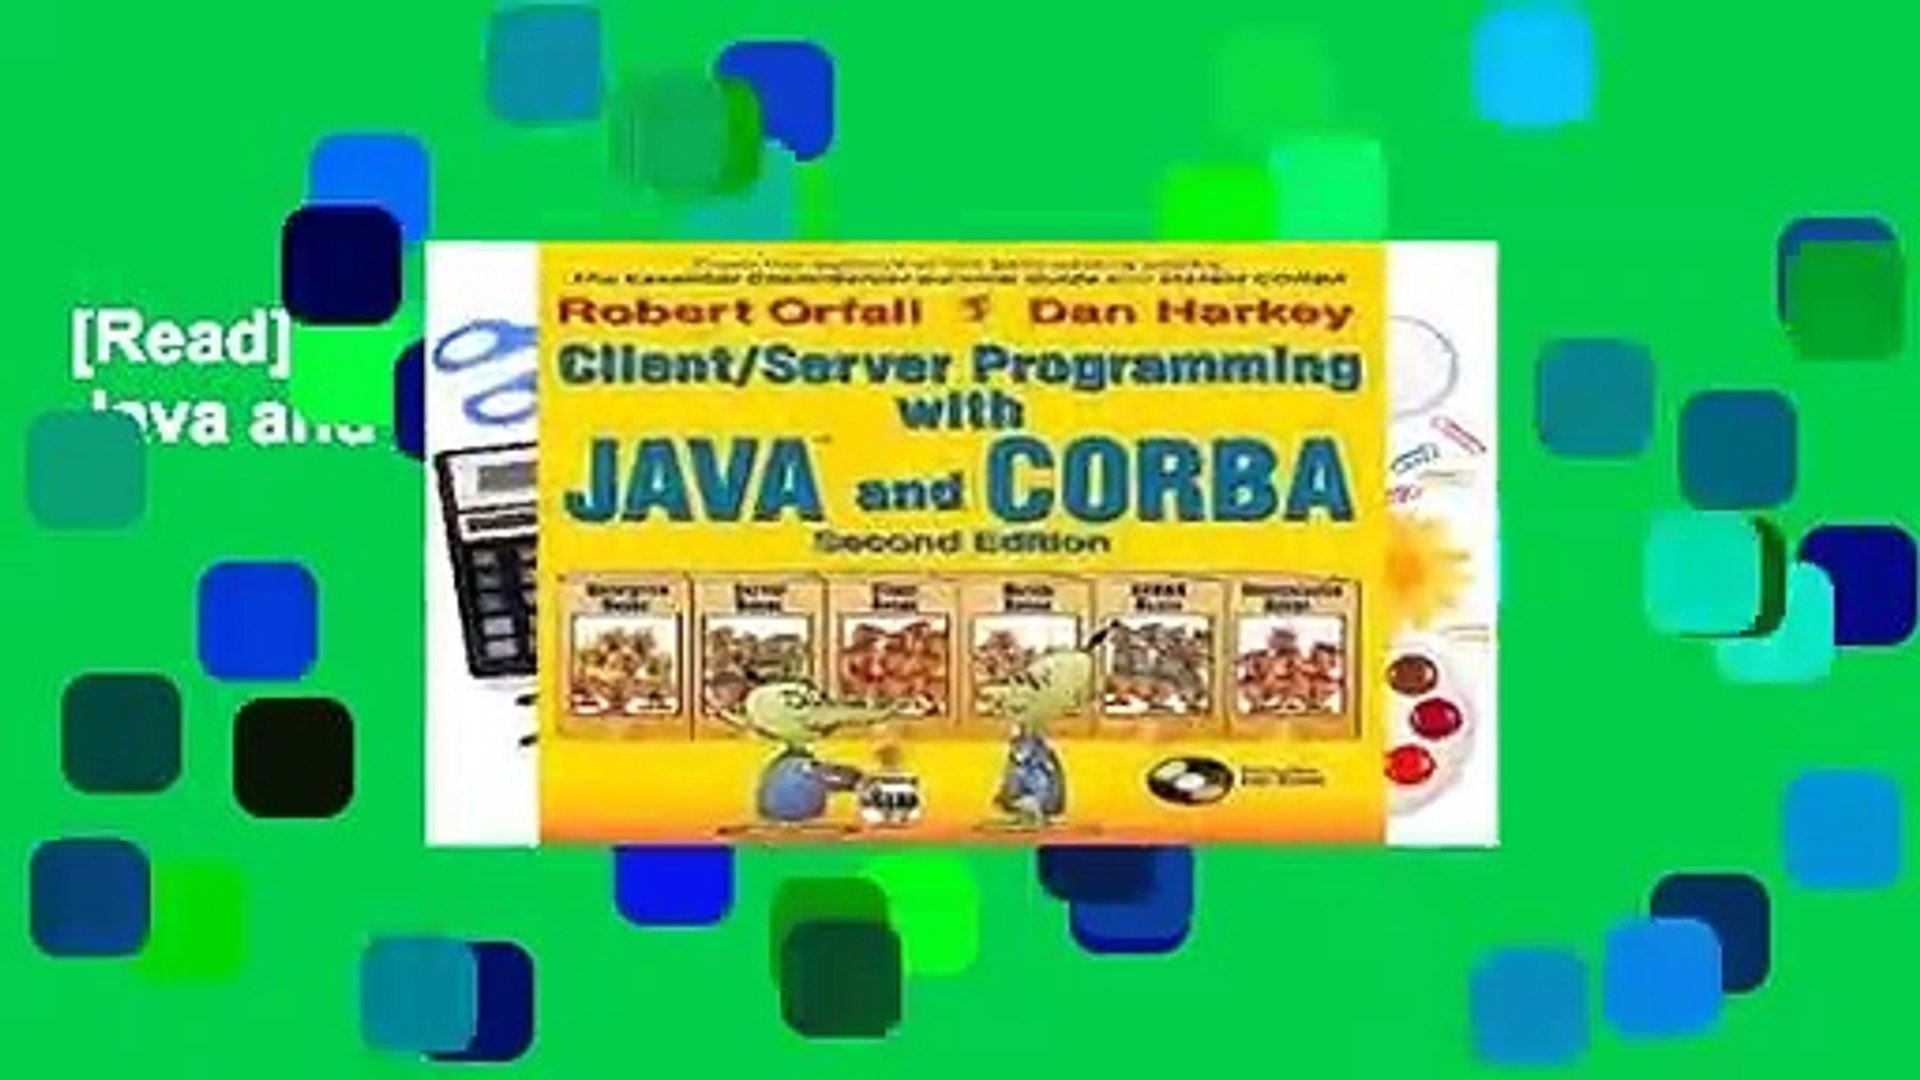 [Read] Client/Server Programming with Java and CORBA  For Online